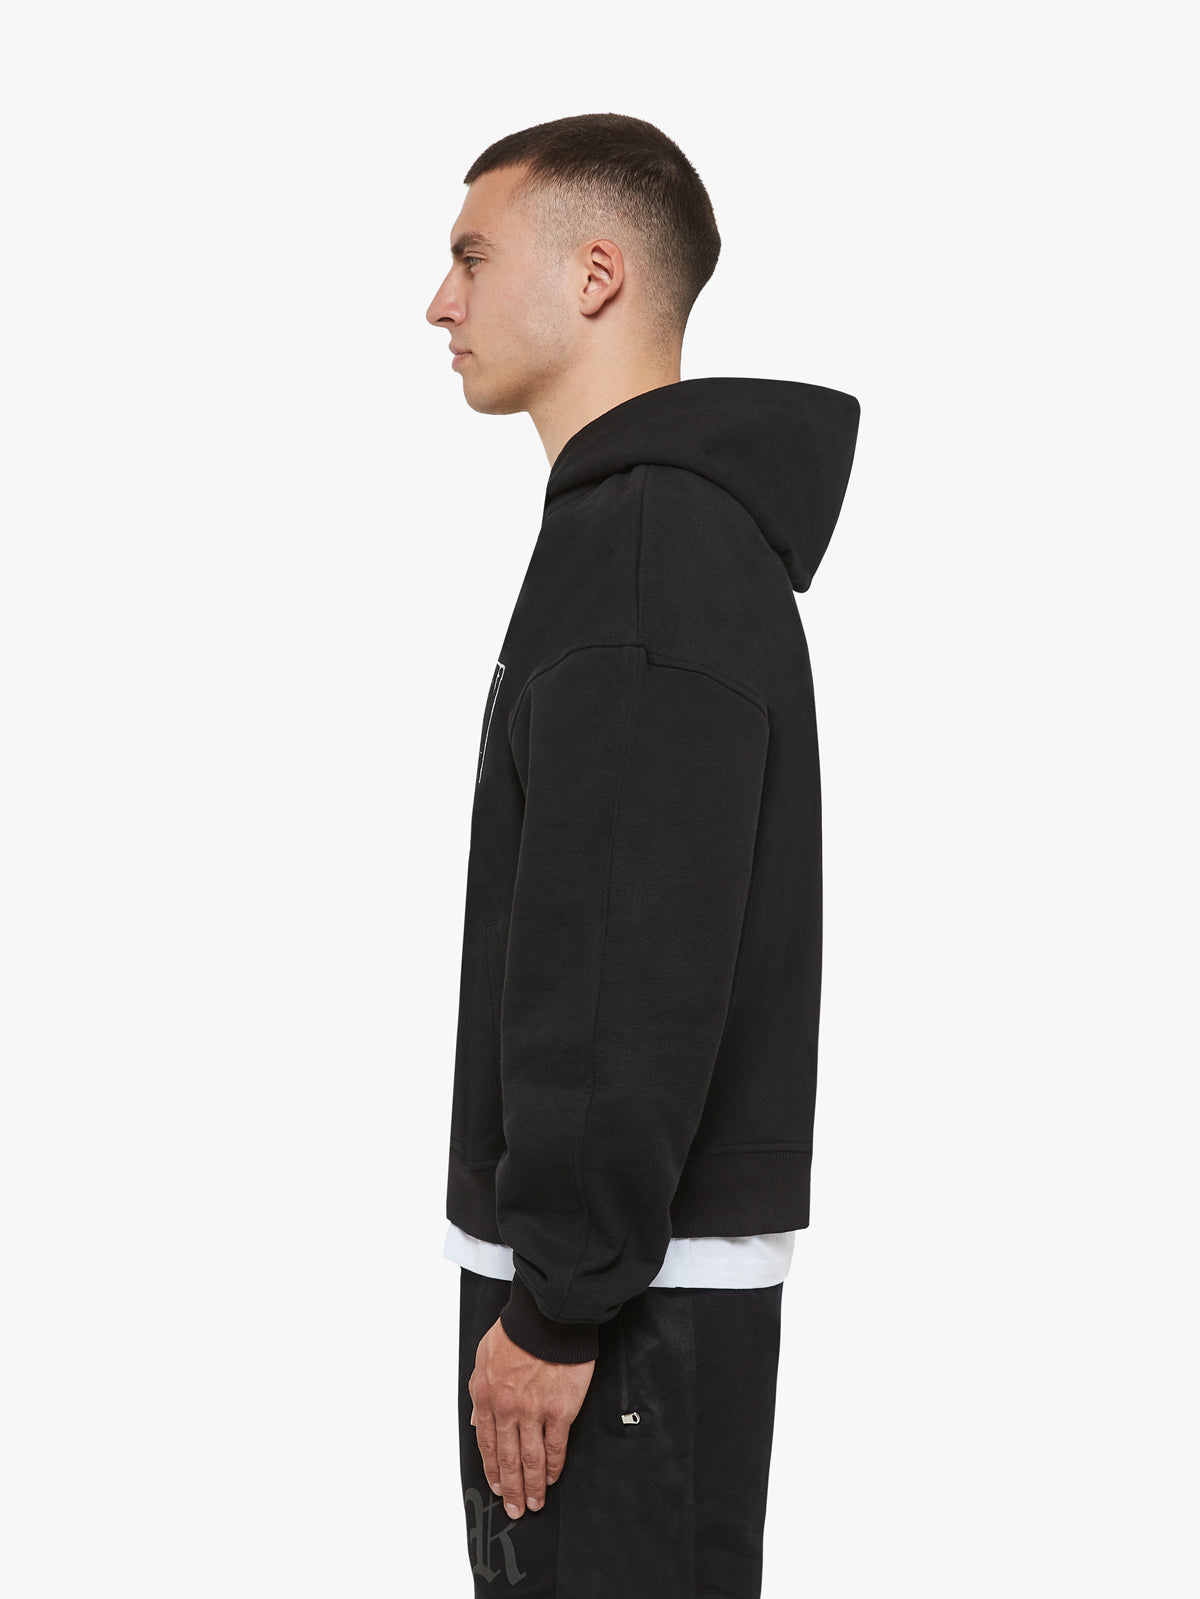 ZIP HOODIE 'COMPETITION RECORD' - BLACK